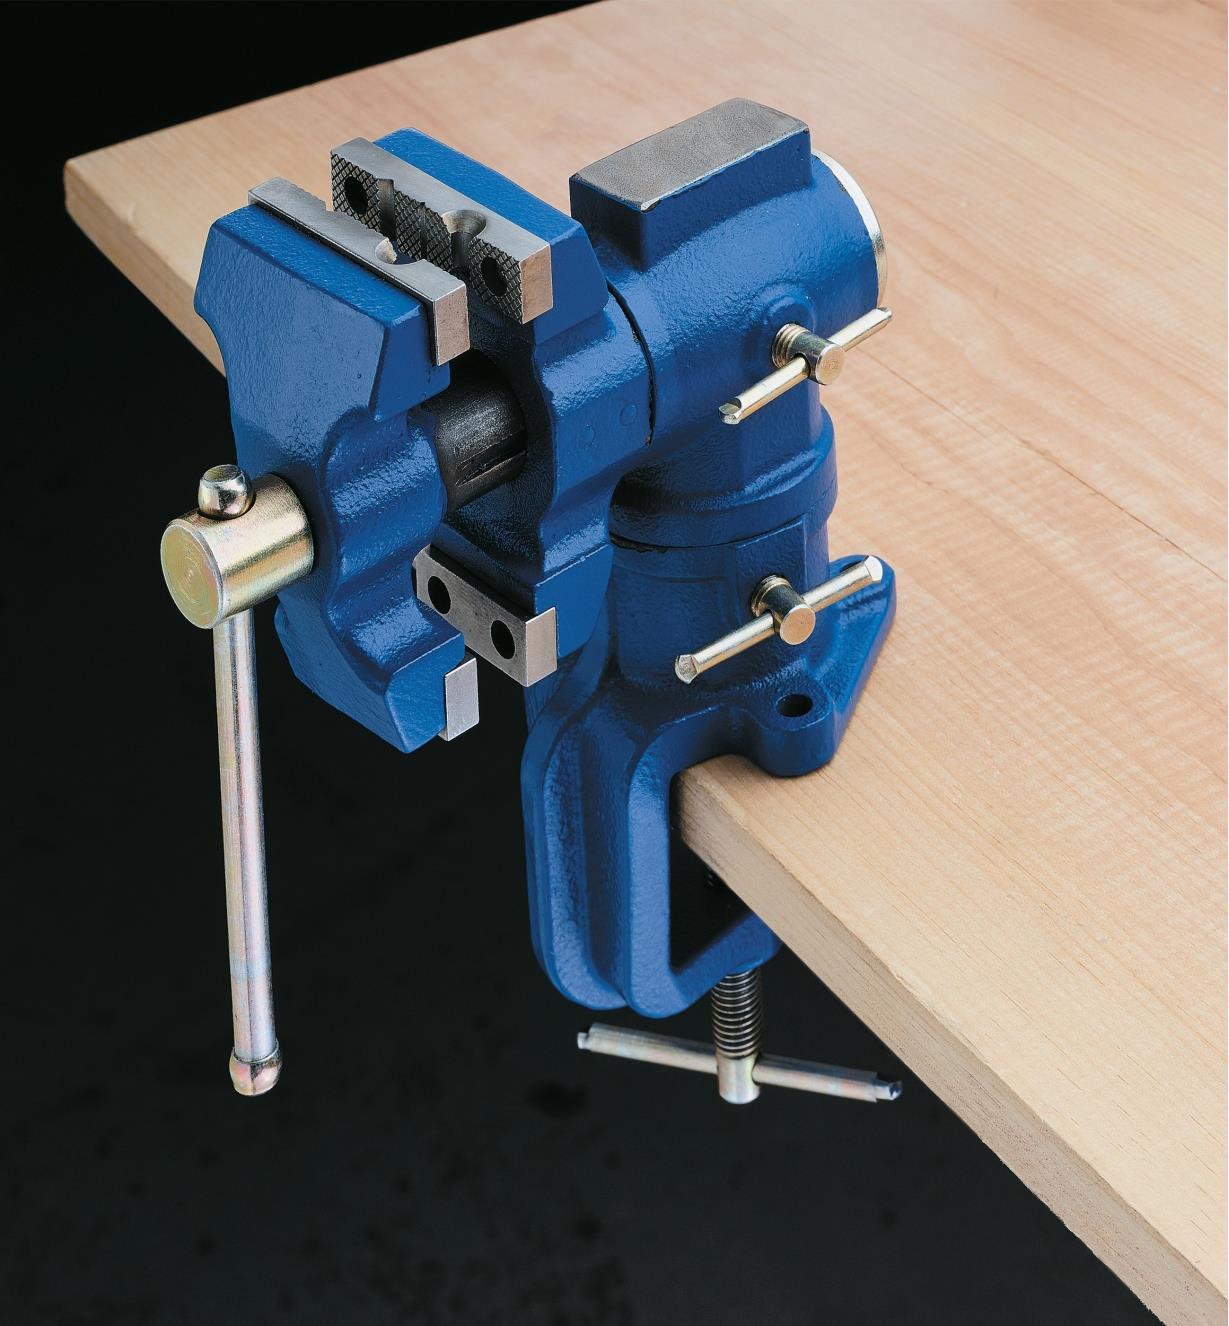 Vise clamped to a table